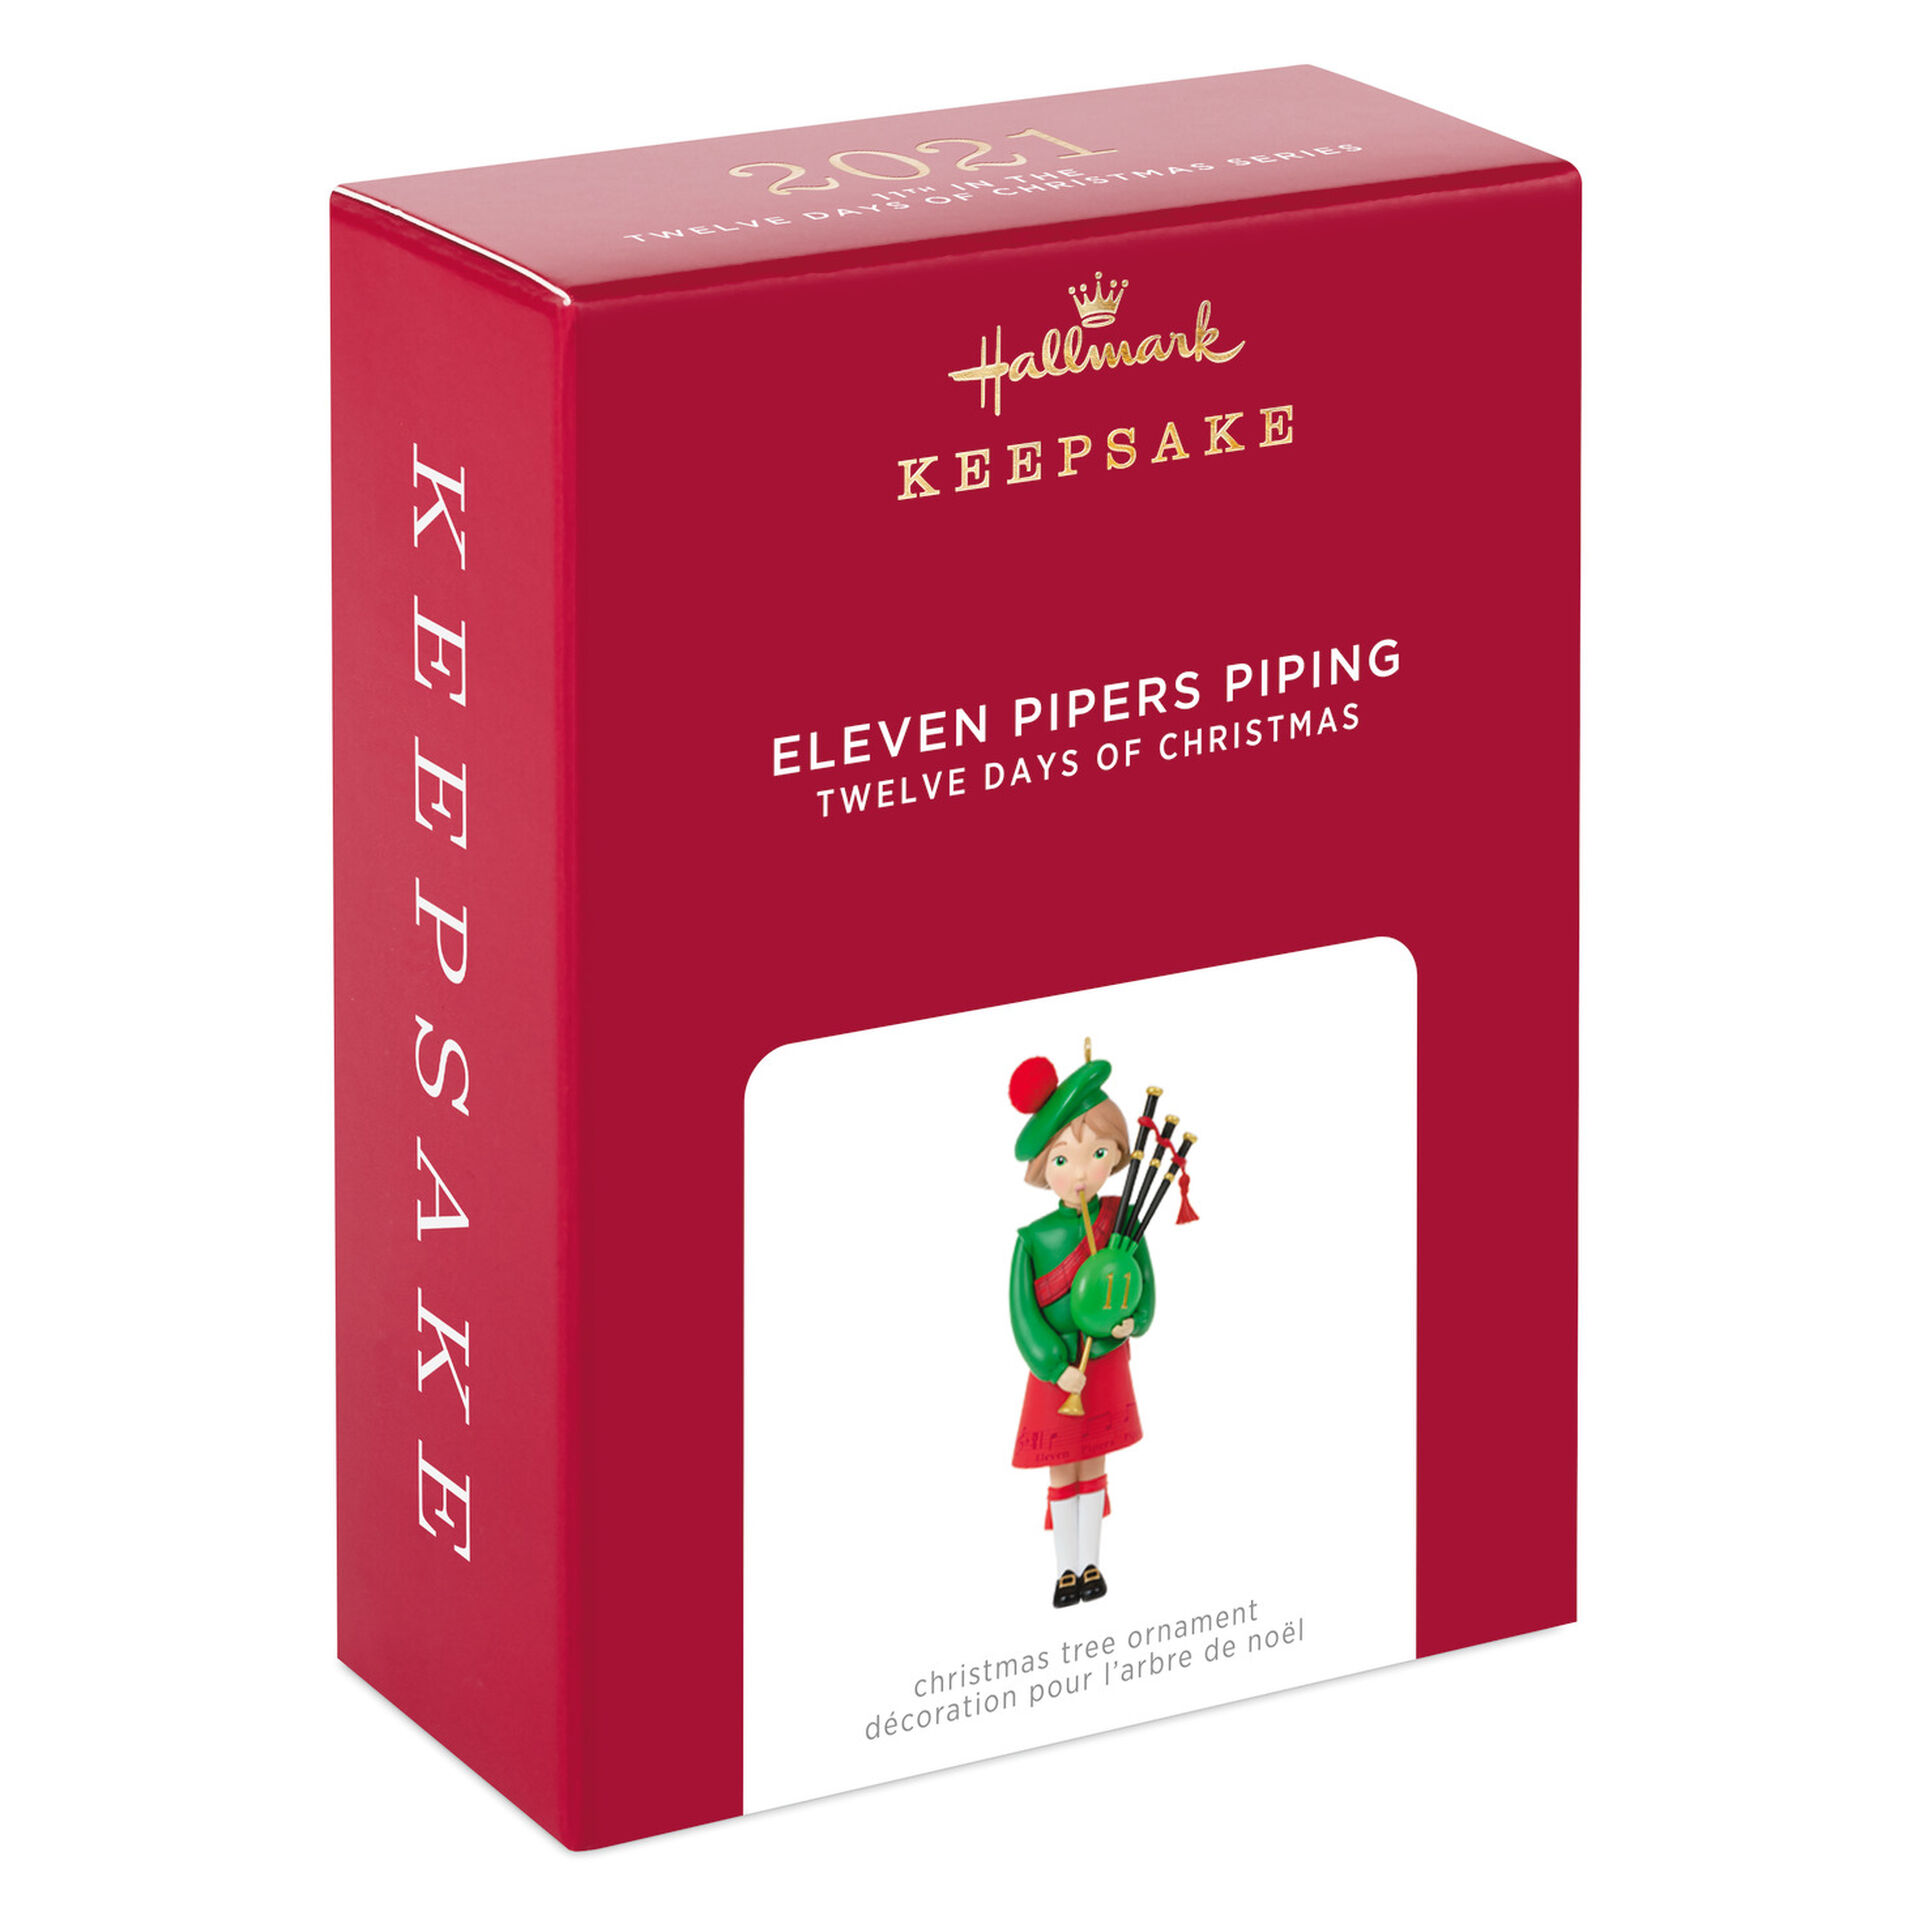 Twelve Days of Christmas Eleven Pipers Piping Ornament 2021